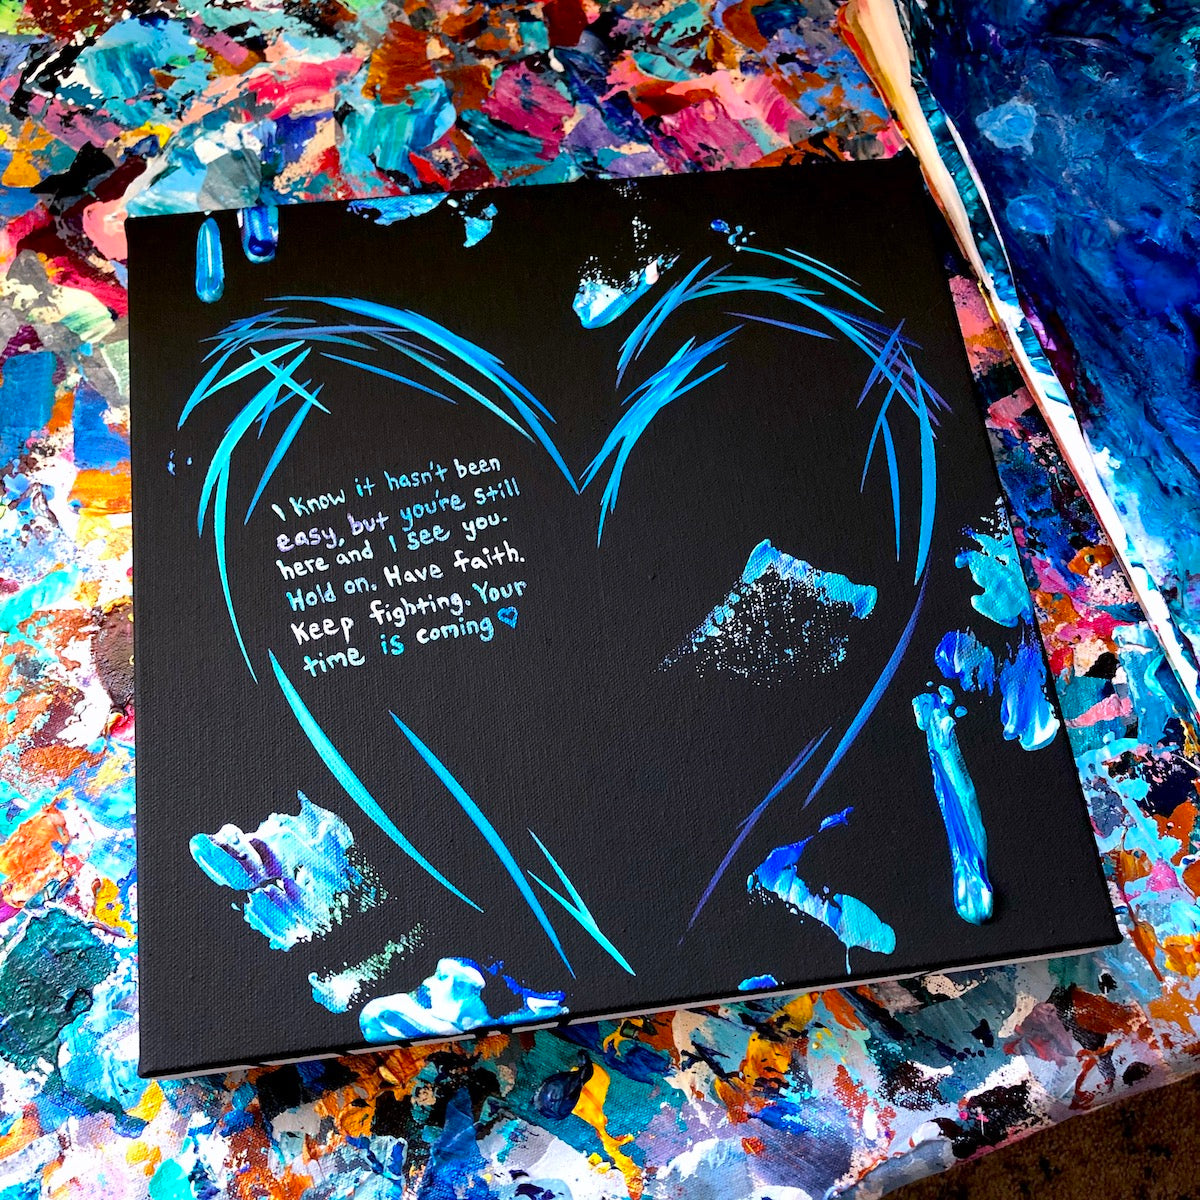 Michael Carini's heart paintings will fill yours with his poetry